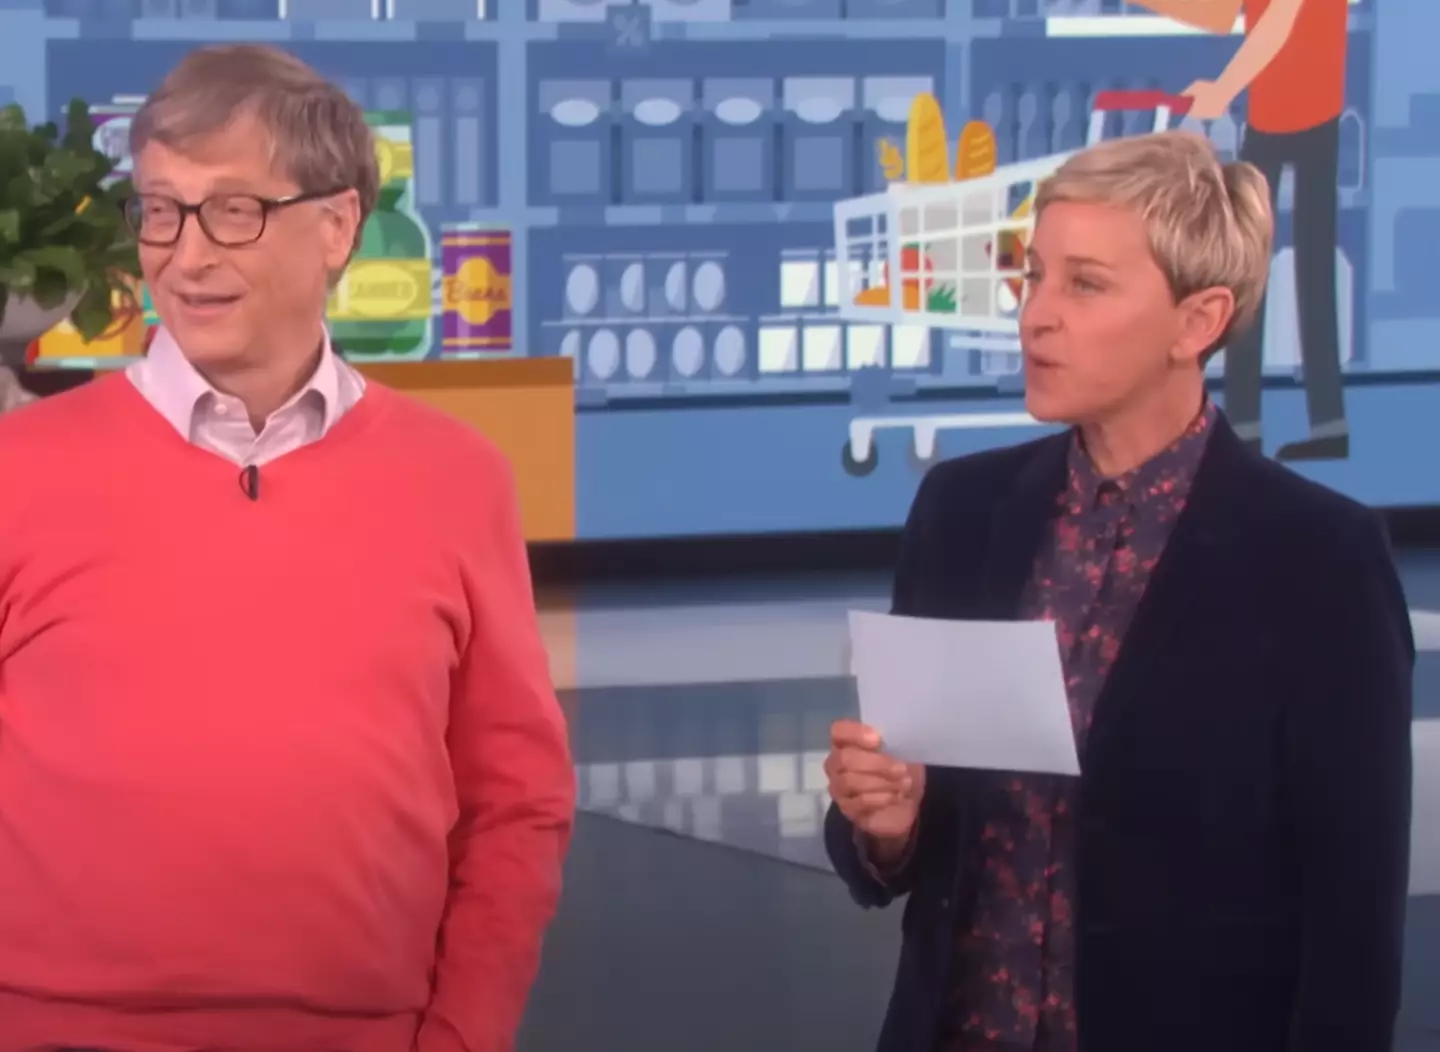 The billionaire was certainly a good sport about the whole thing. (The Ellen DeGeneres Show)